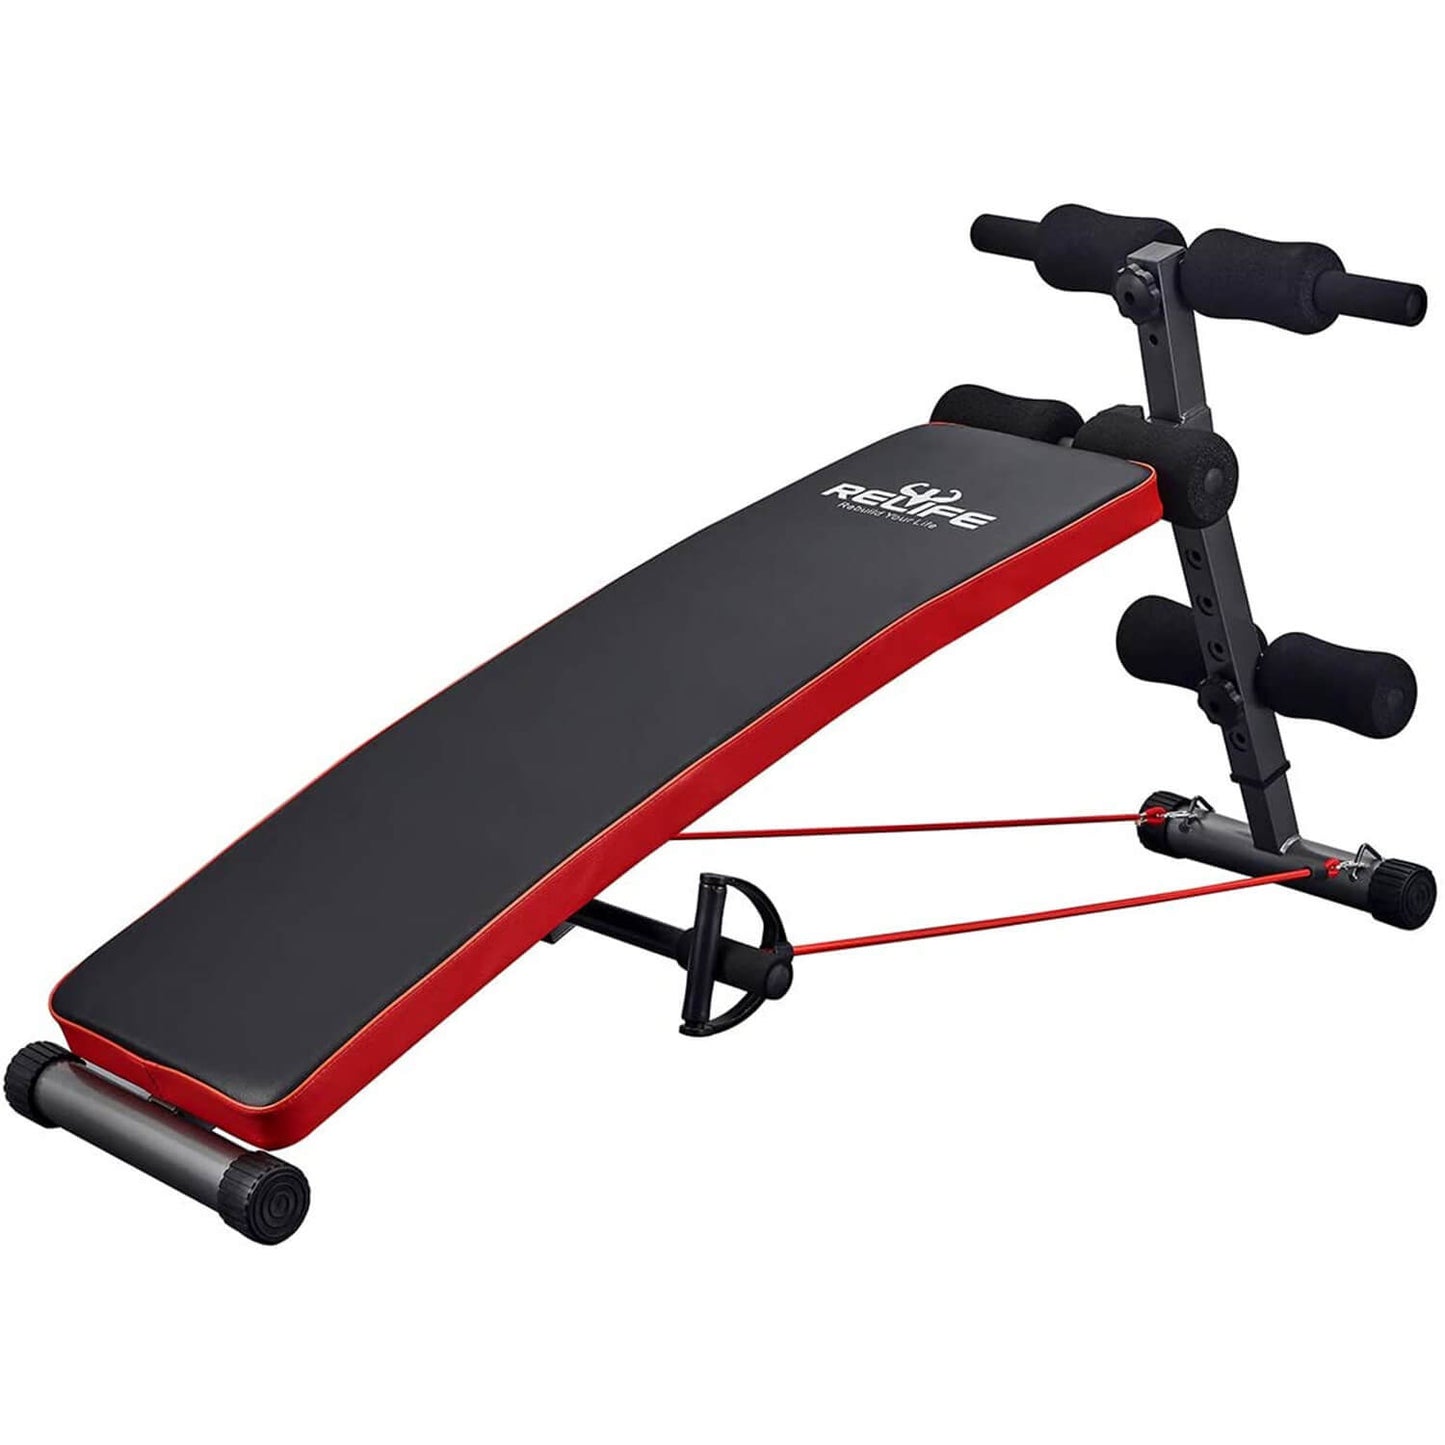 RELIFE Multifunction Sit-up Bench